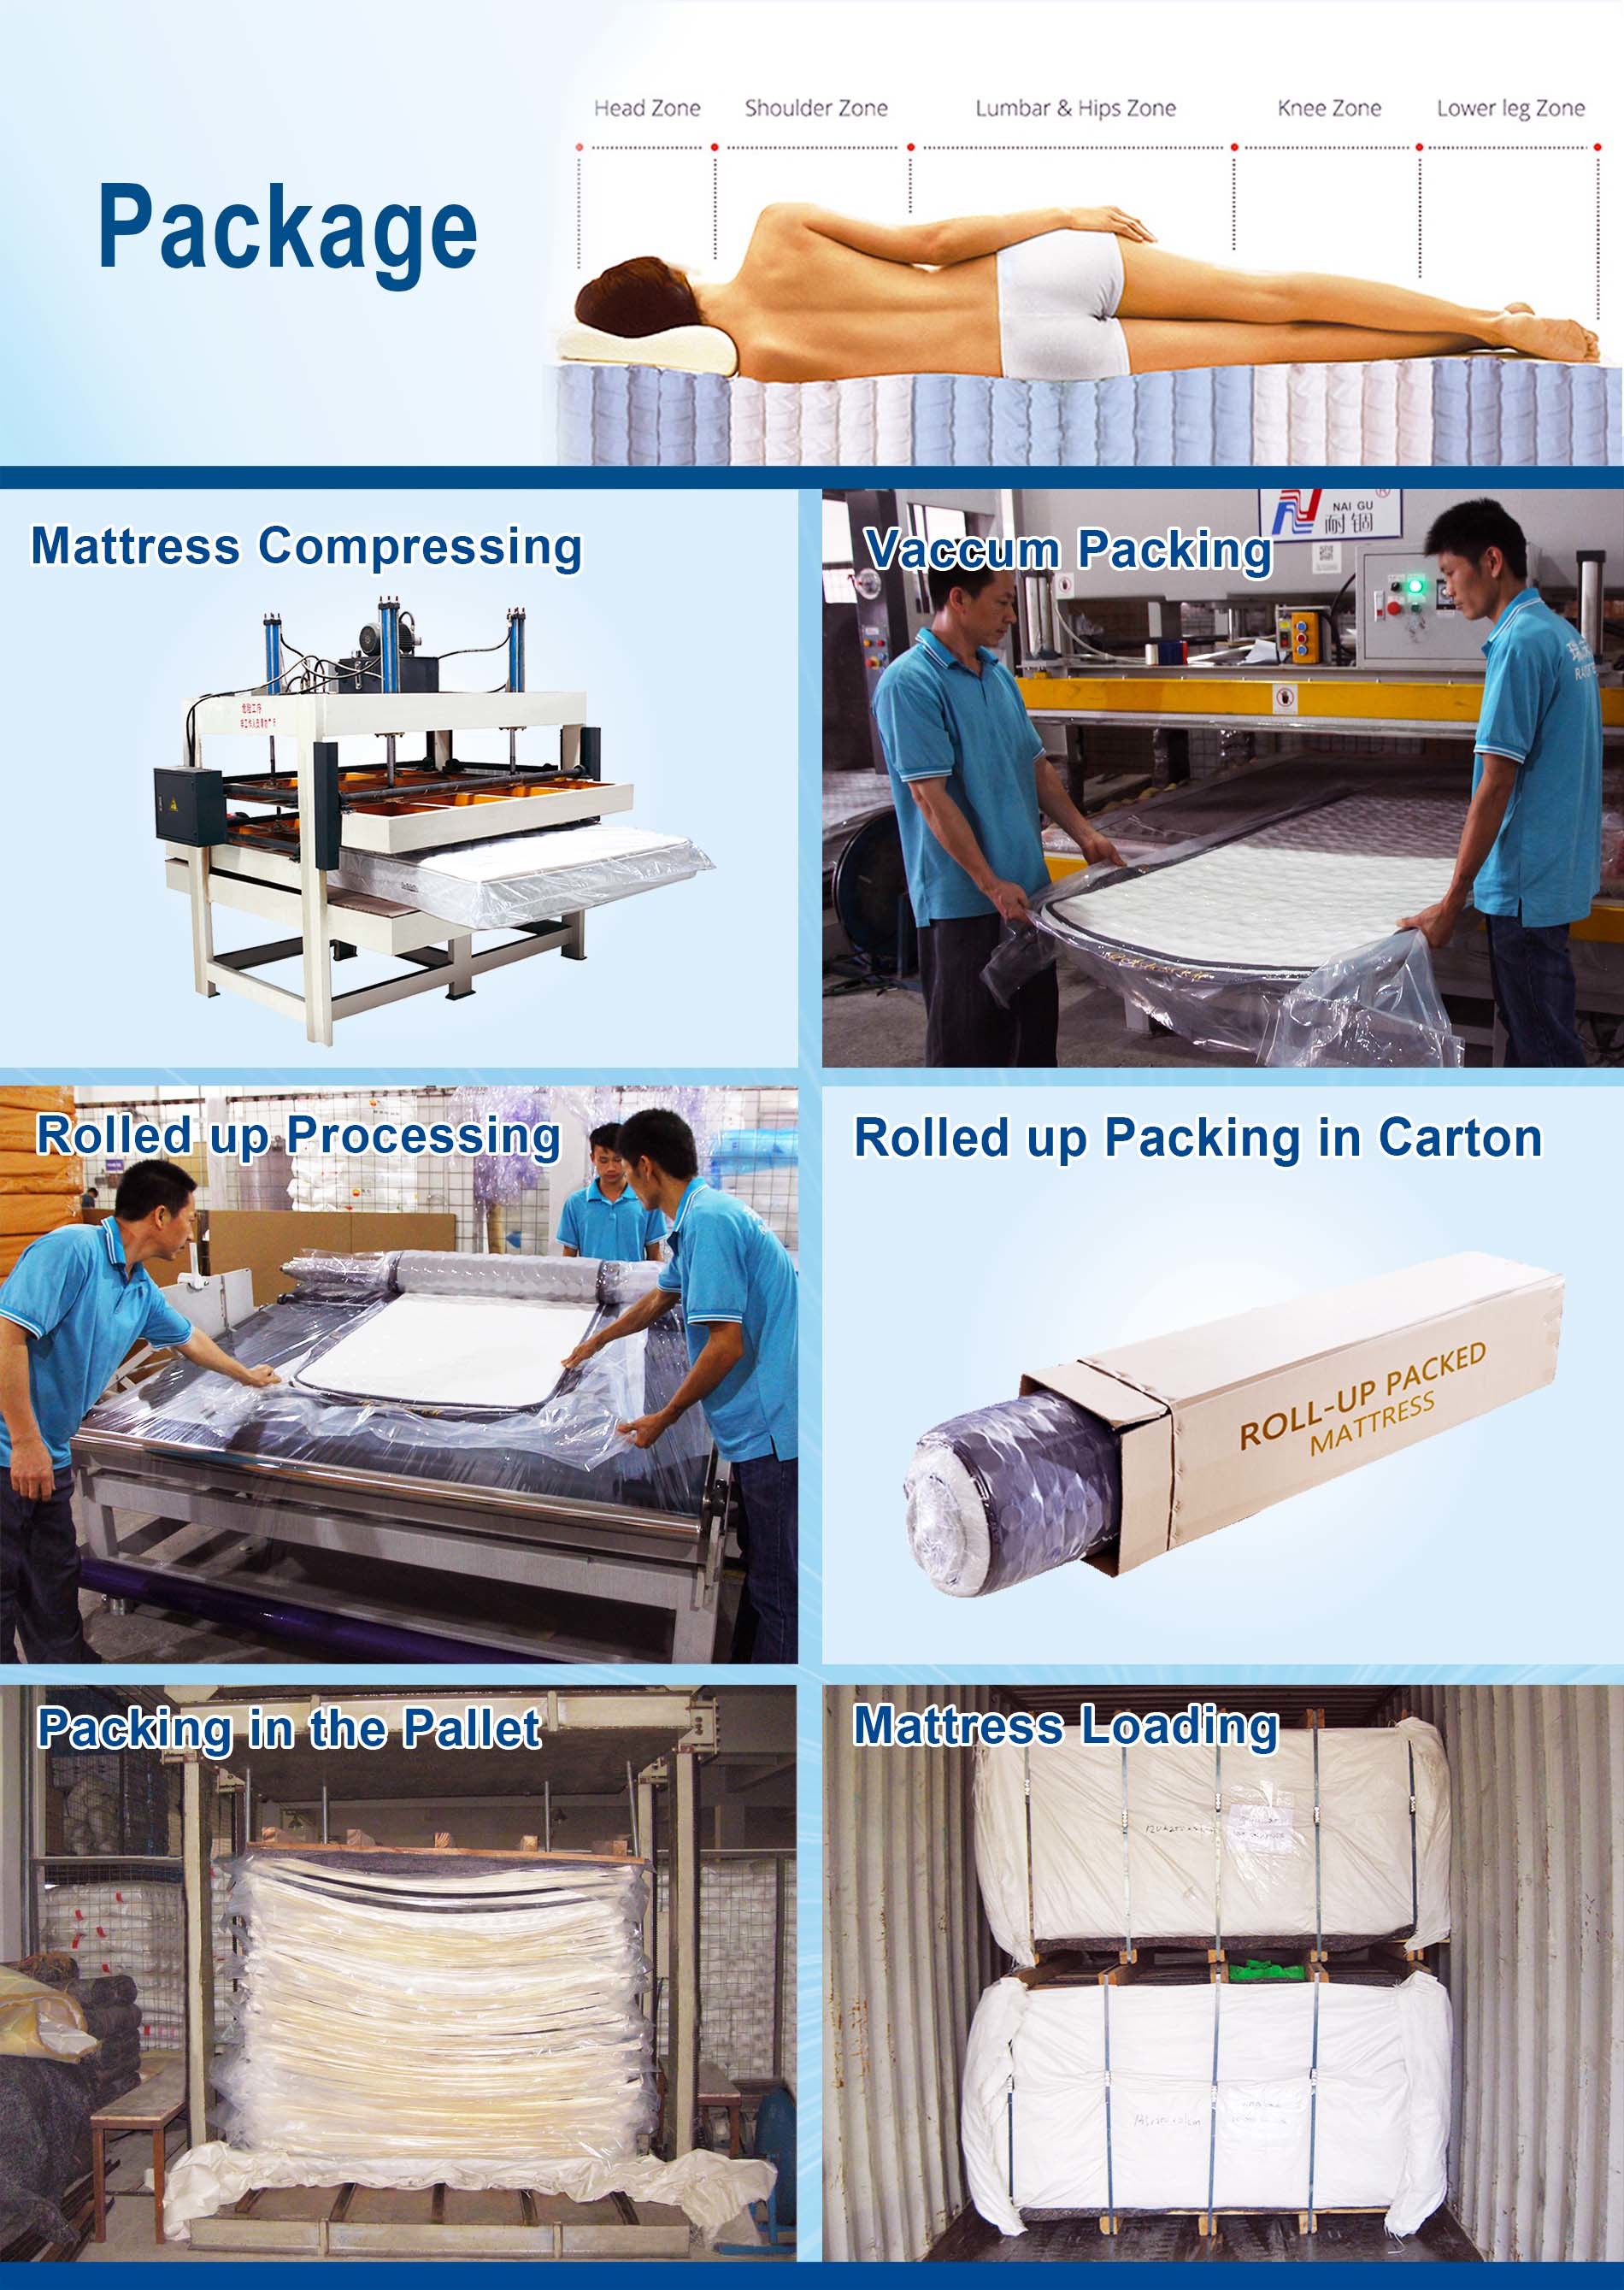 spring mattress four seasons hotel mattress customized at discount Synwin